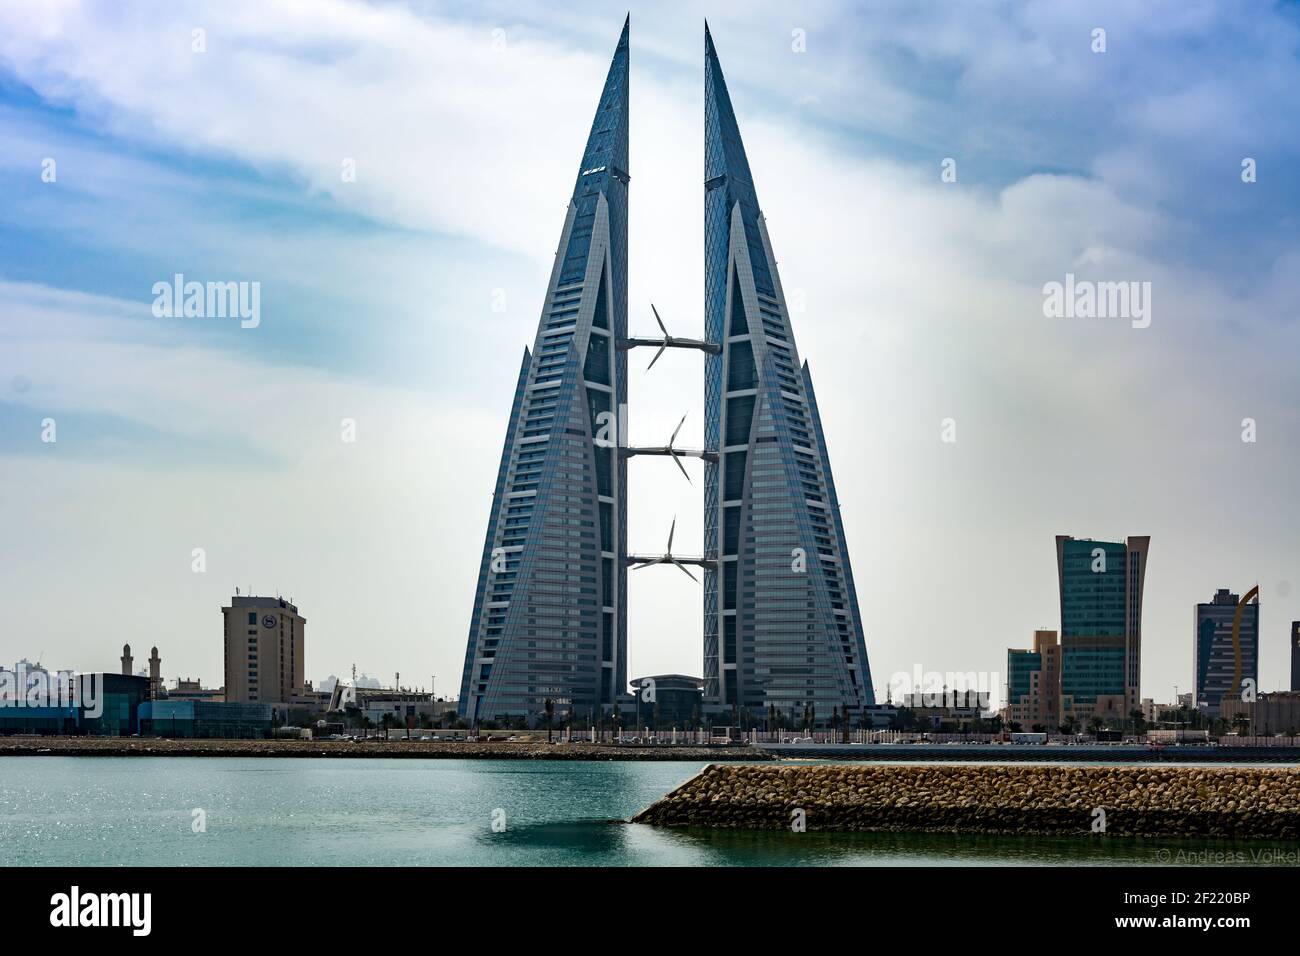 MANAMA, BAHRAIN - Apr 12, 2017: The Bahrain World Trade Center is a building in the Bahraini capital Manama. A specialty of the skyscraper are mounted Stock Photo